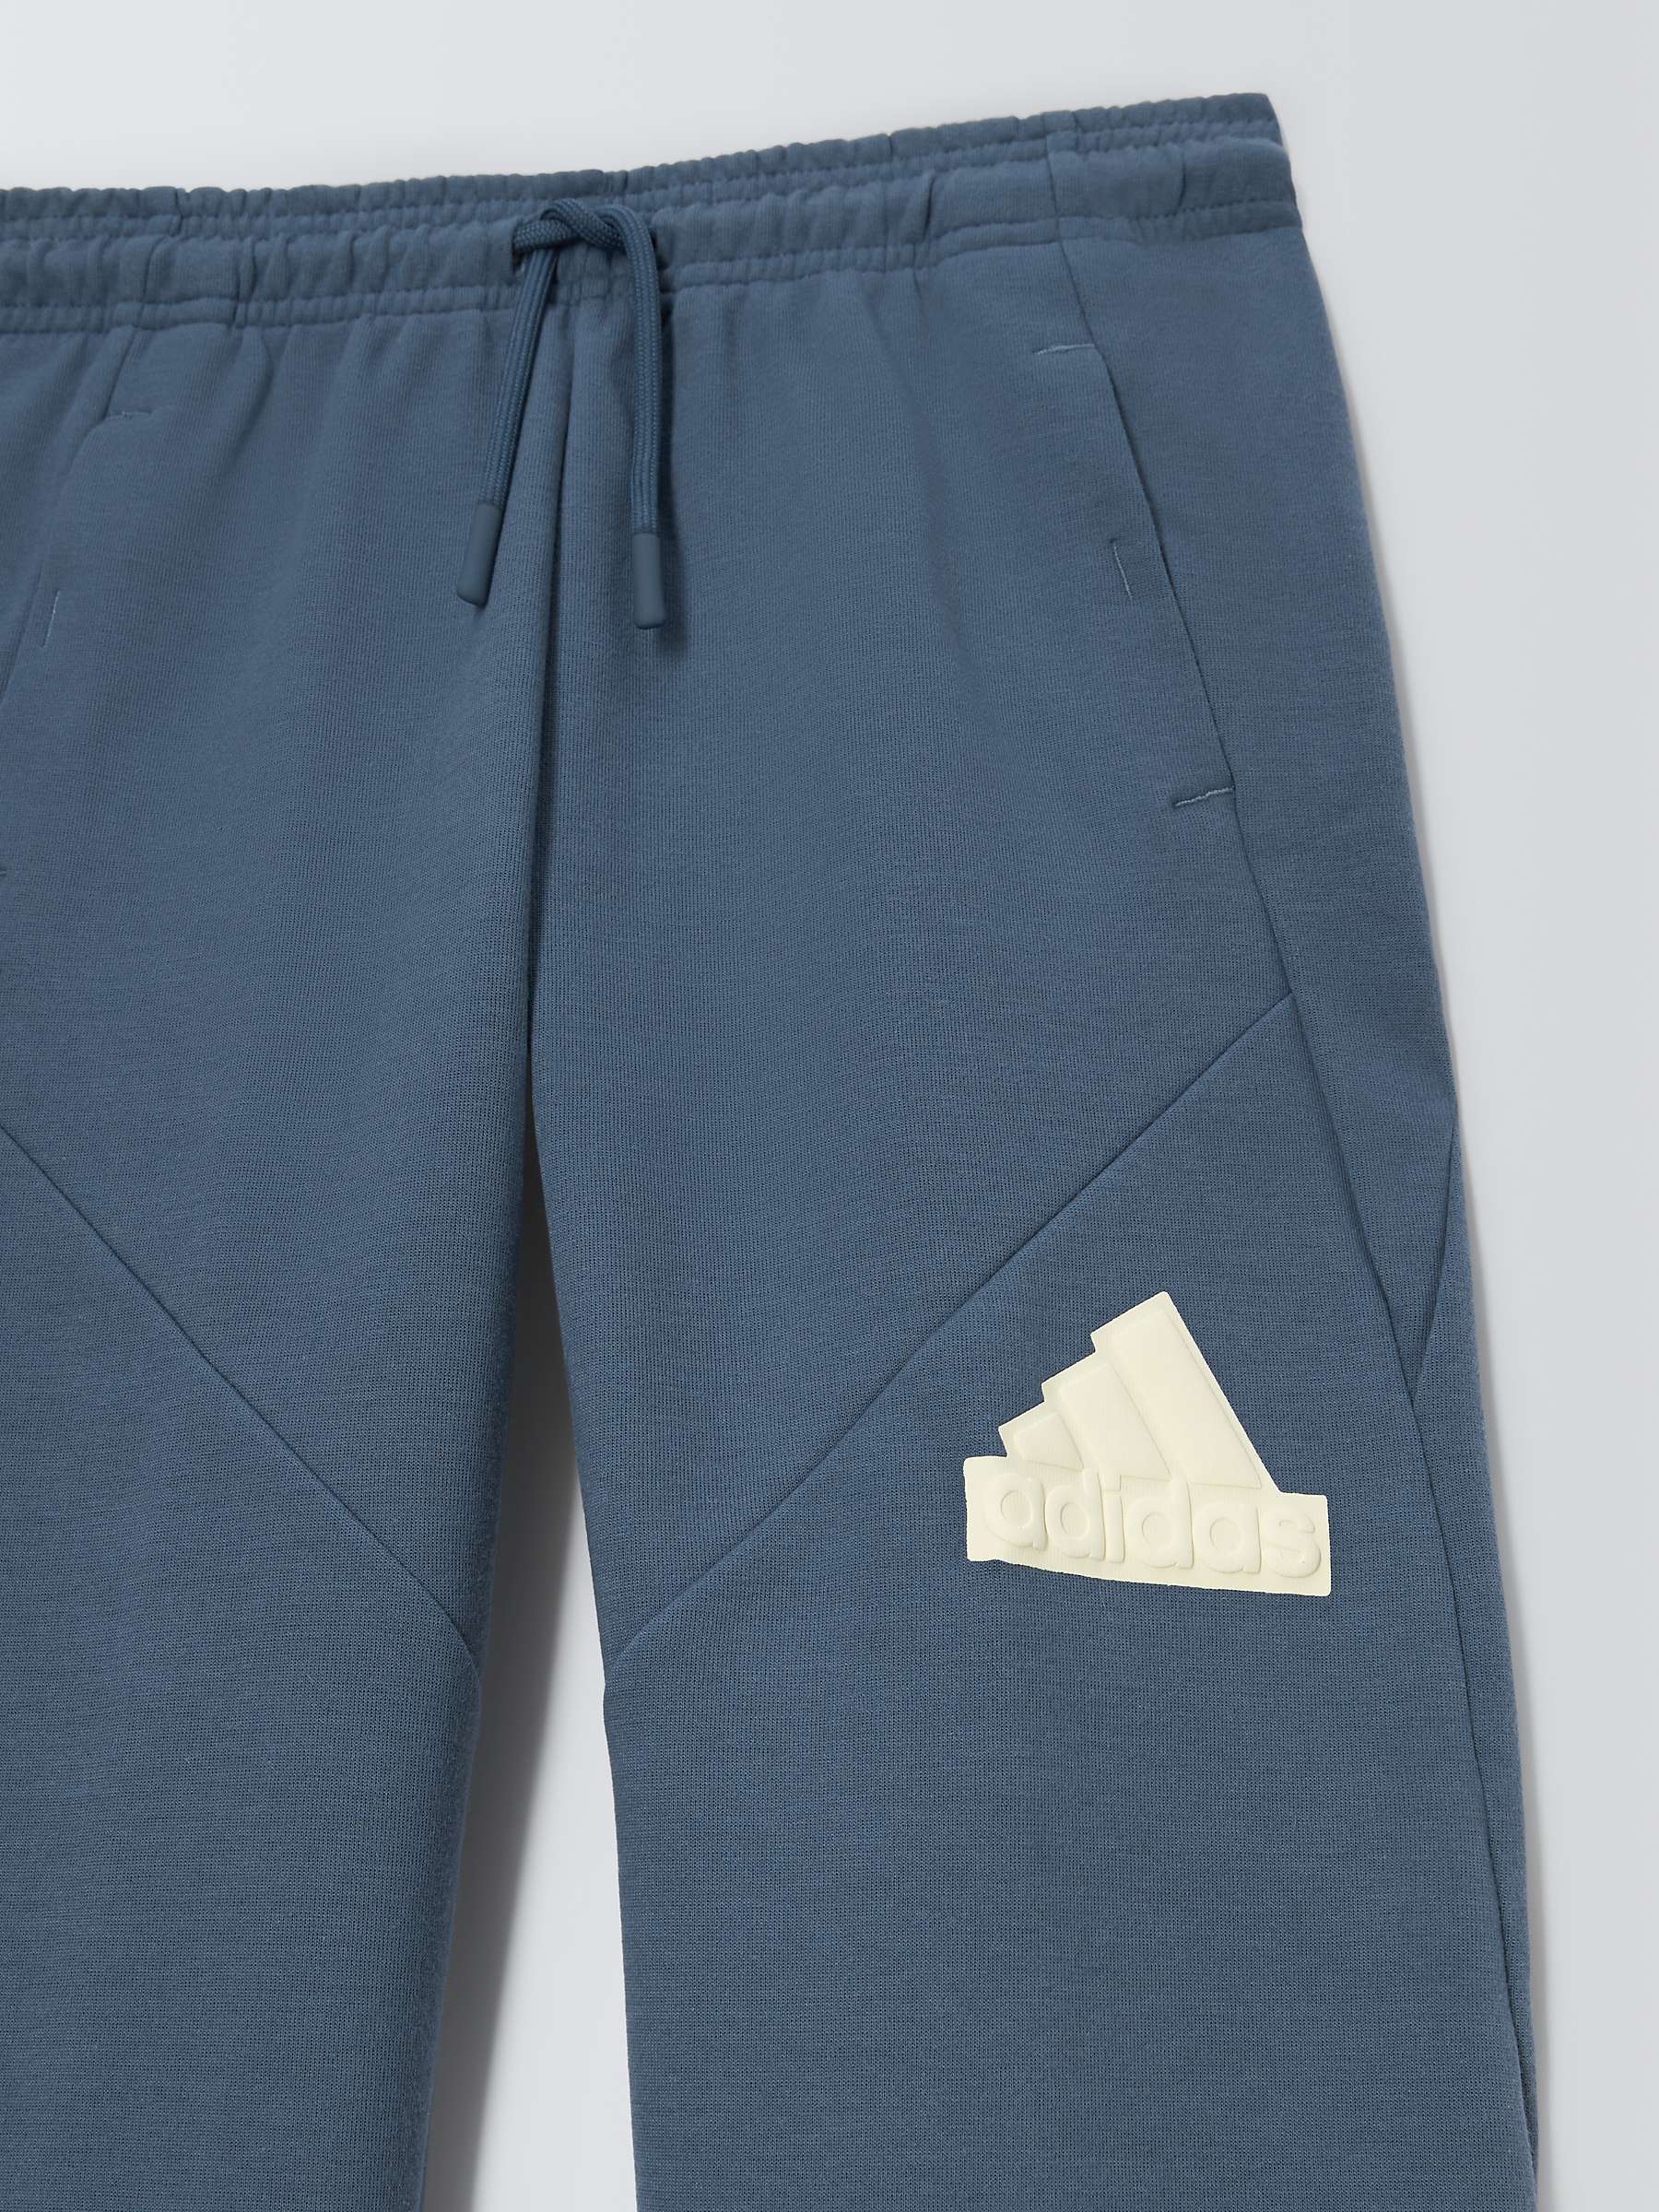 Buy adidas Kids' Future Icons Logo Joggers, Prloin/Ivory Online at johnlewis.com